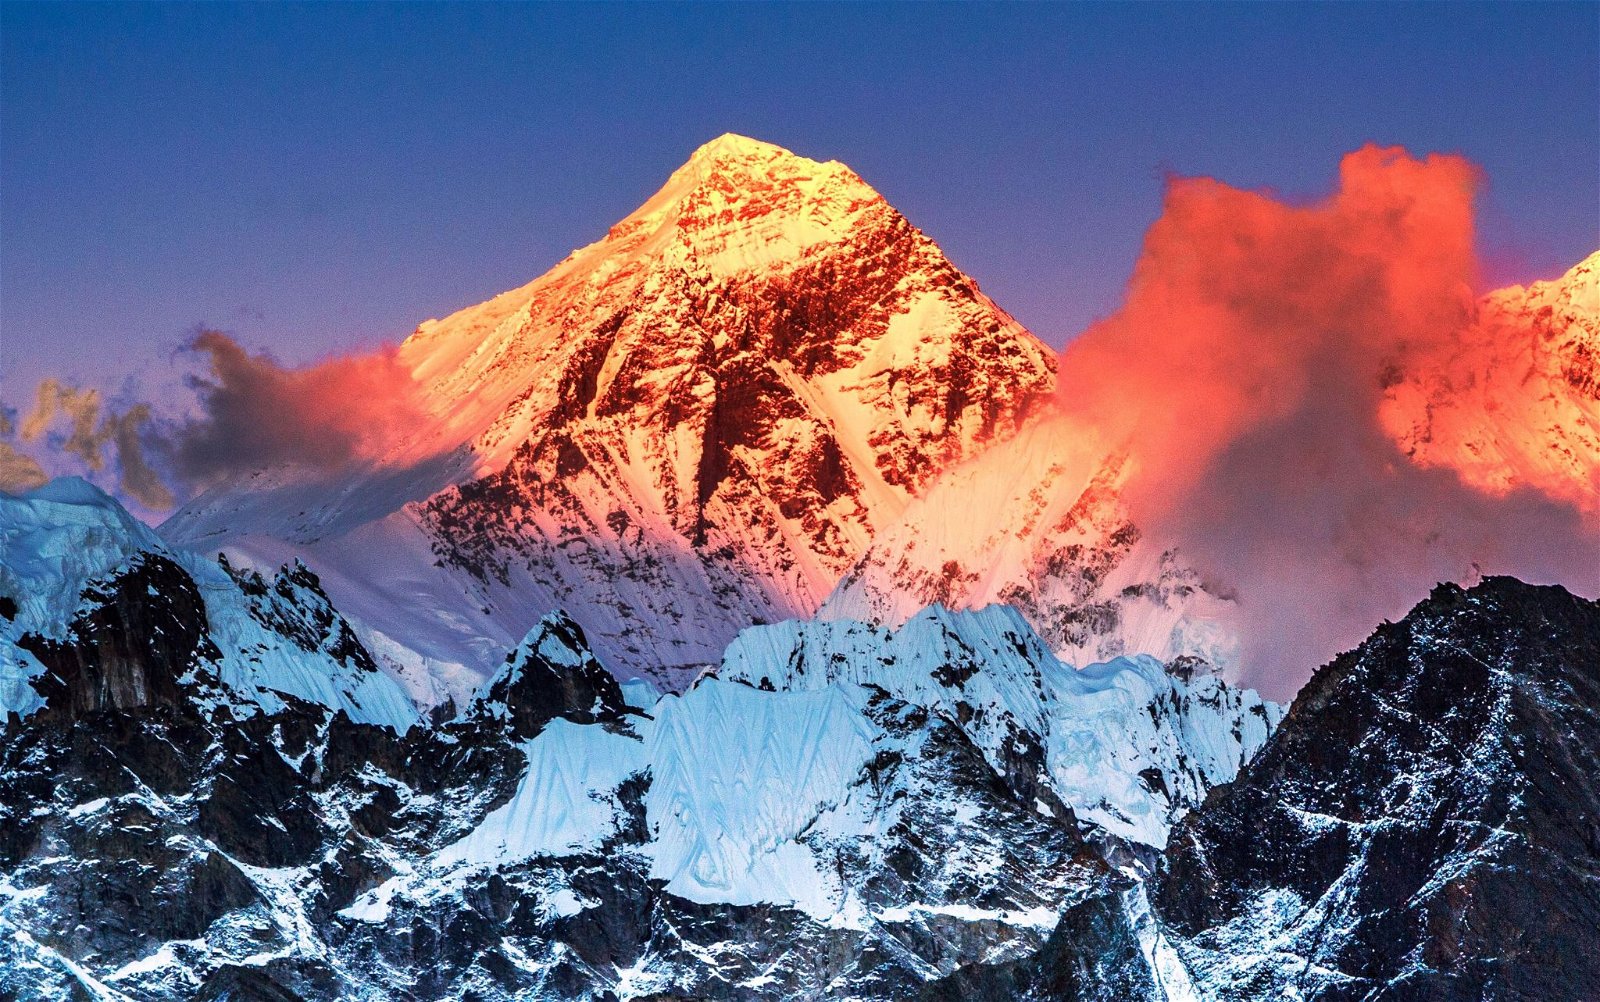 Facts of Mount Everest